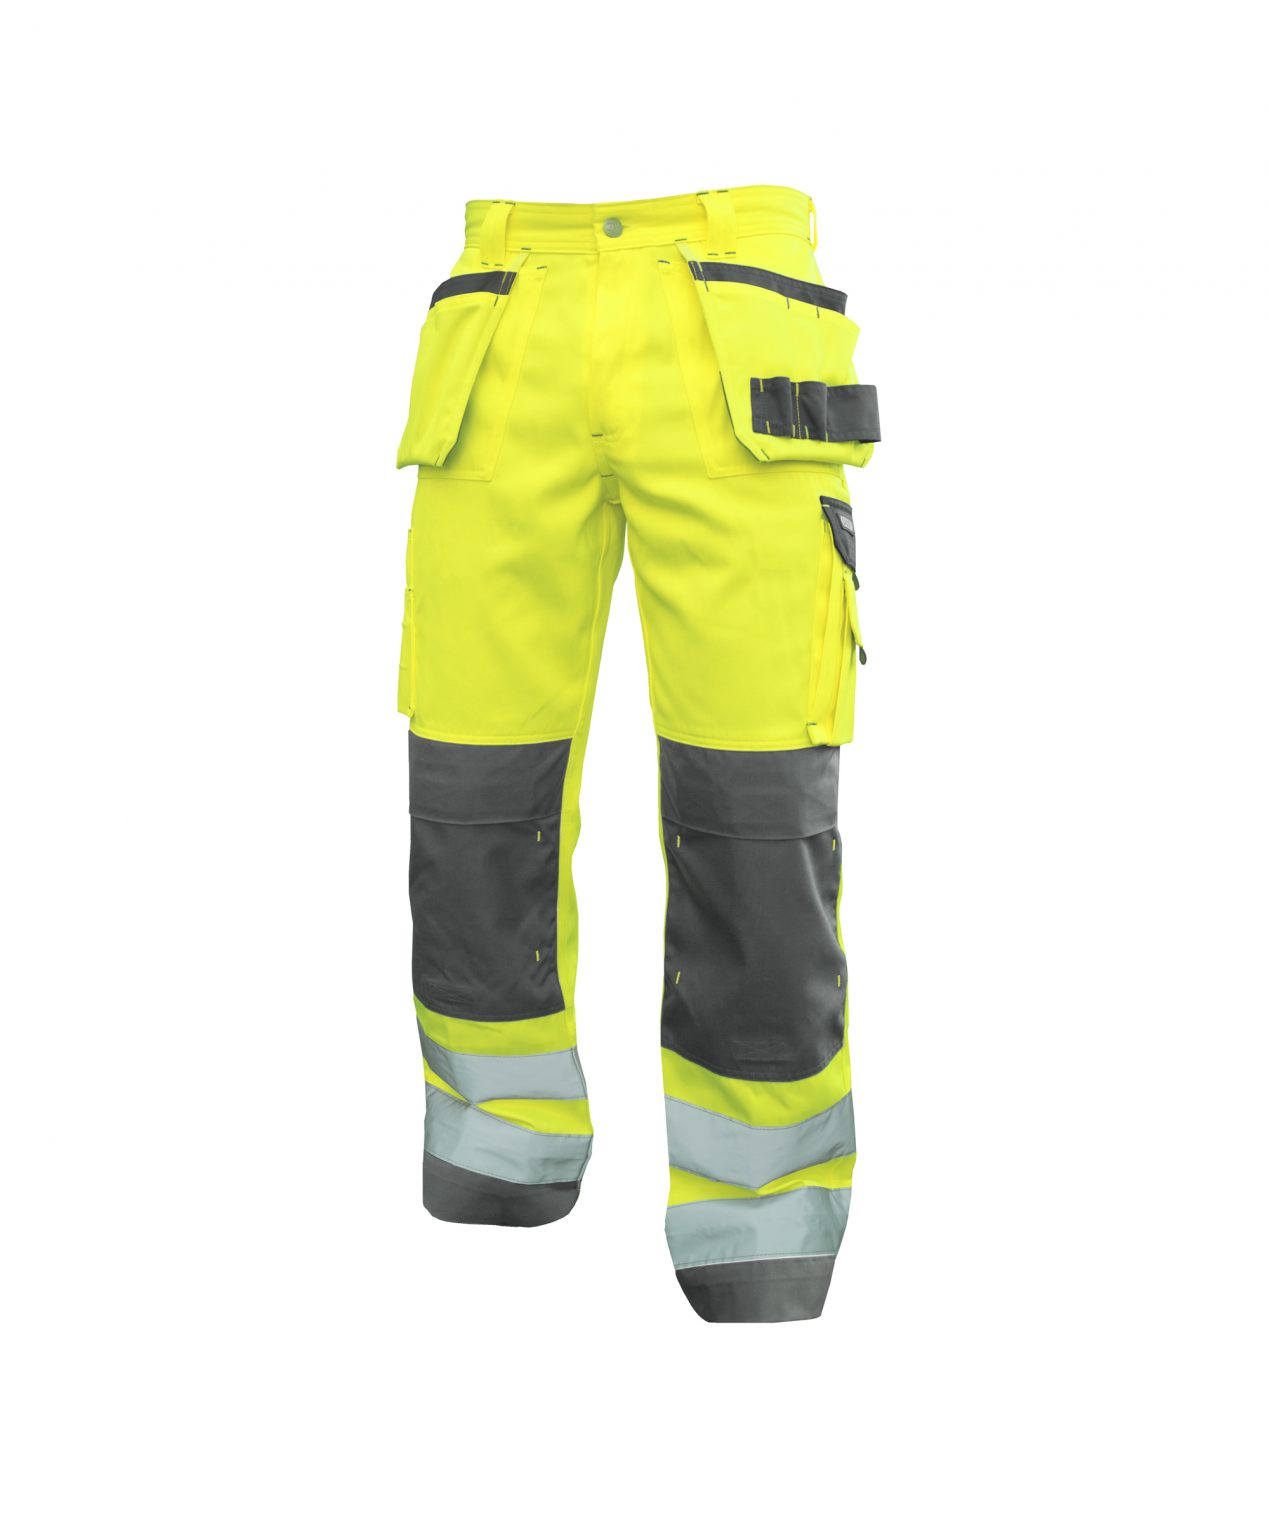 glasgow high visibility trousers with holster pockets and knee pockets fluo yellow cement grey front